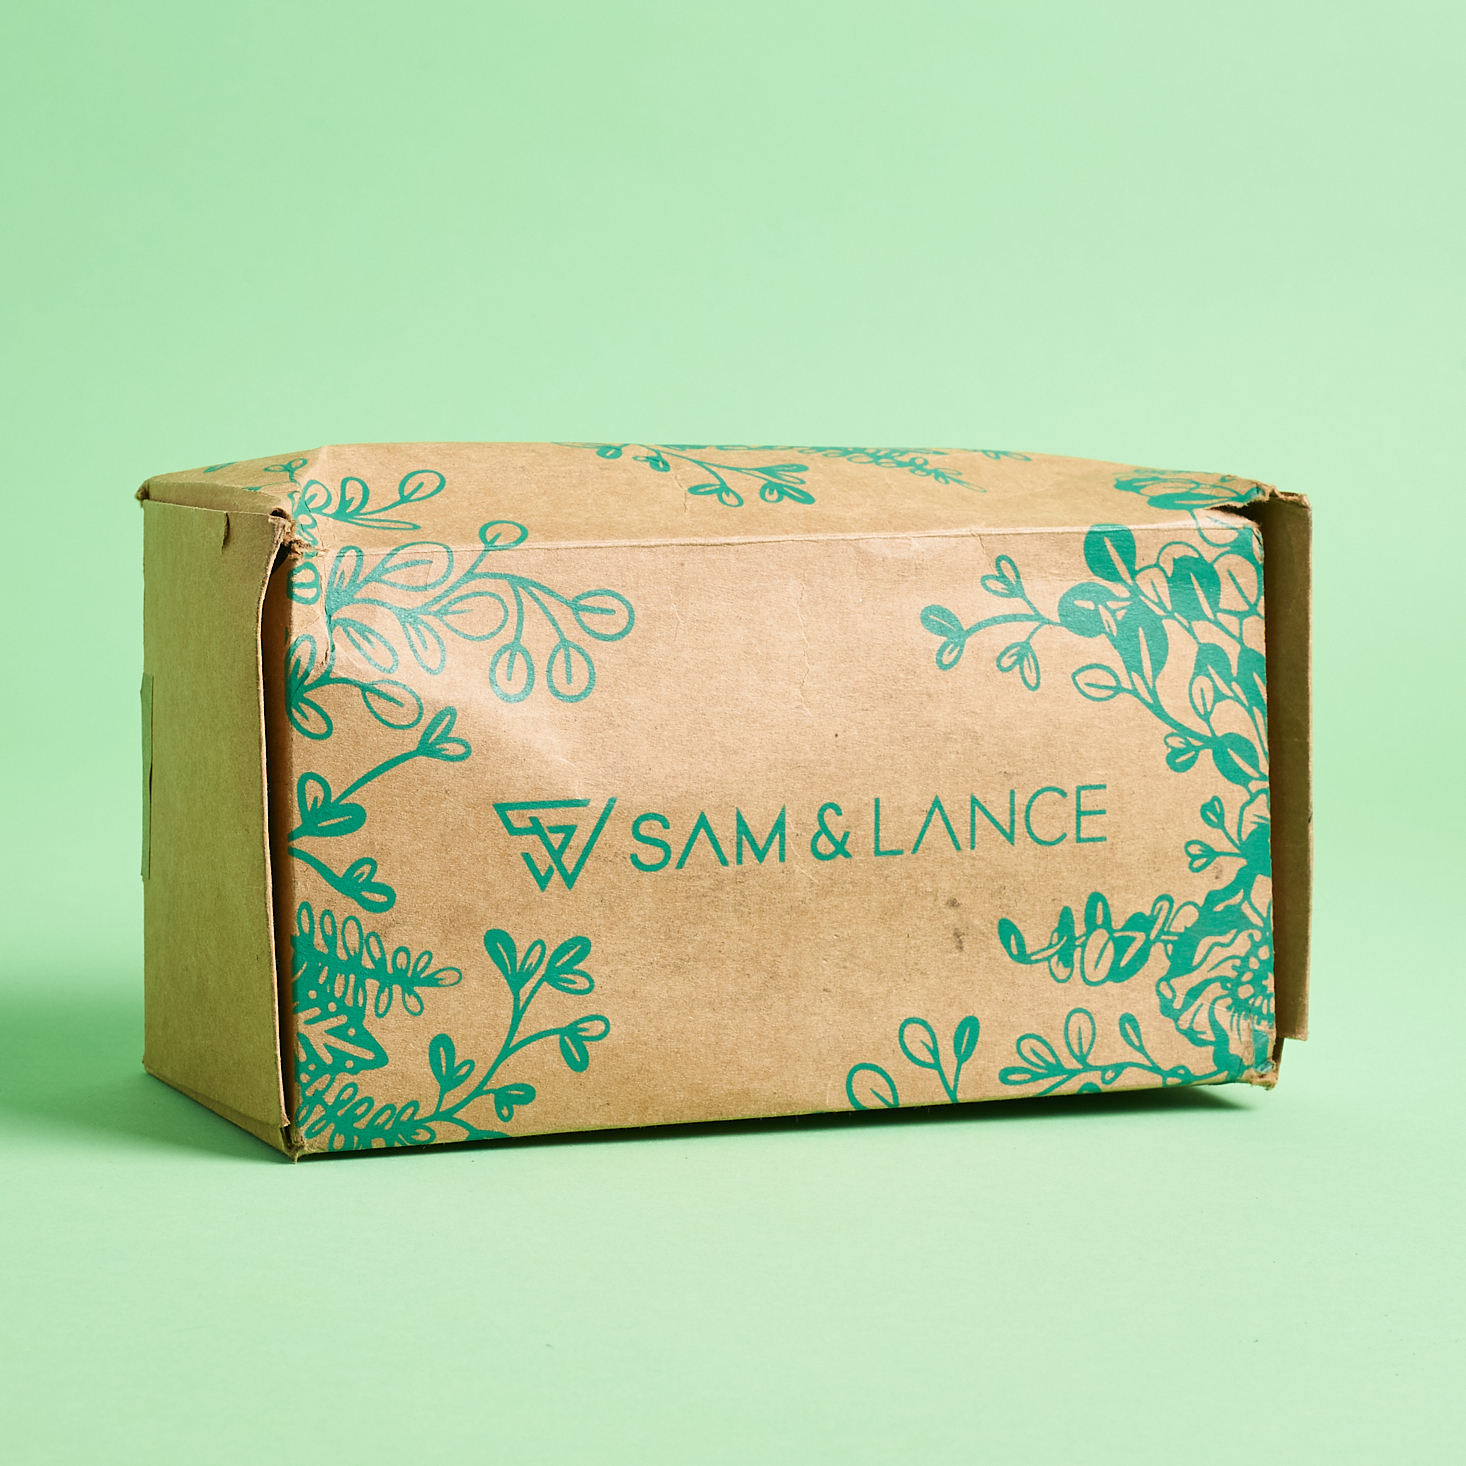 SAM & LANCE Sustainable Subscription WINTER Box Review